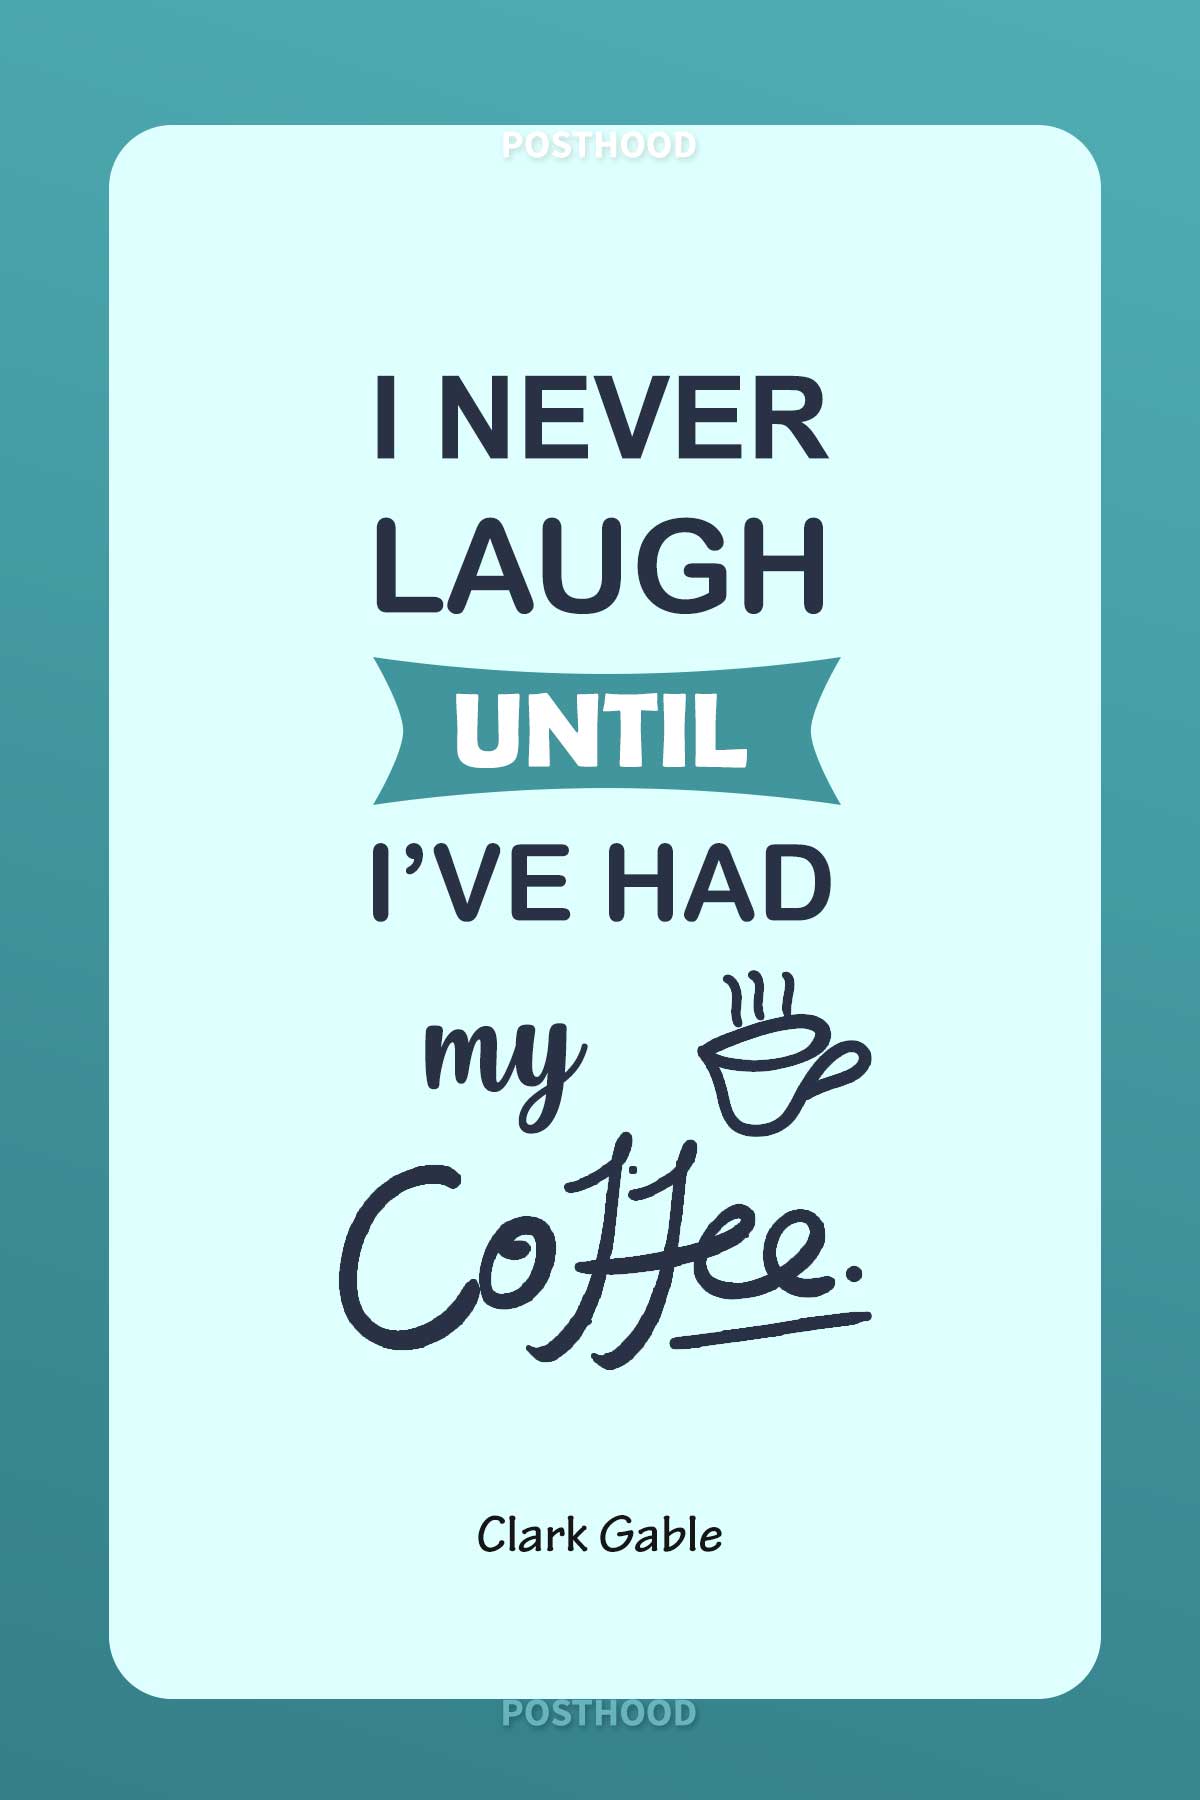 Honor your sacred relationship with coffee with these funny coffee quotes and share the love with the world!